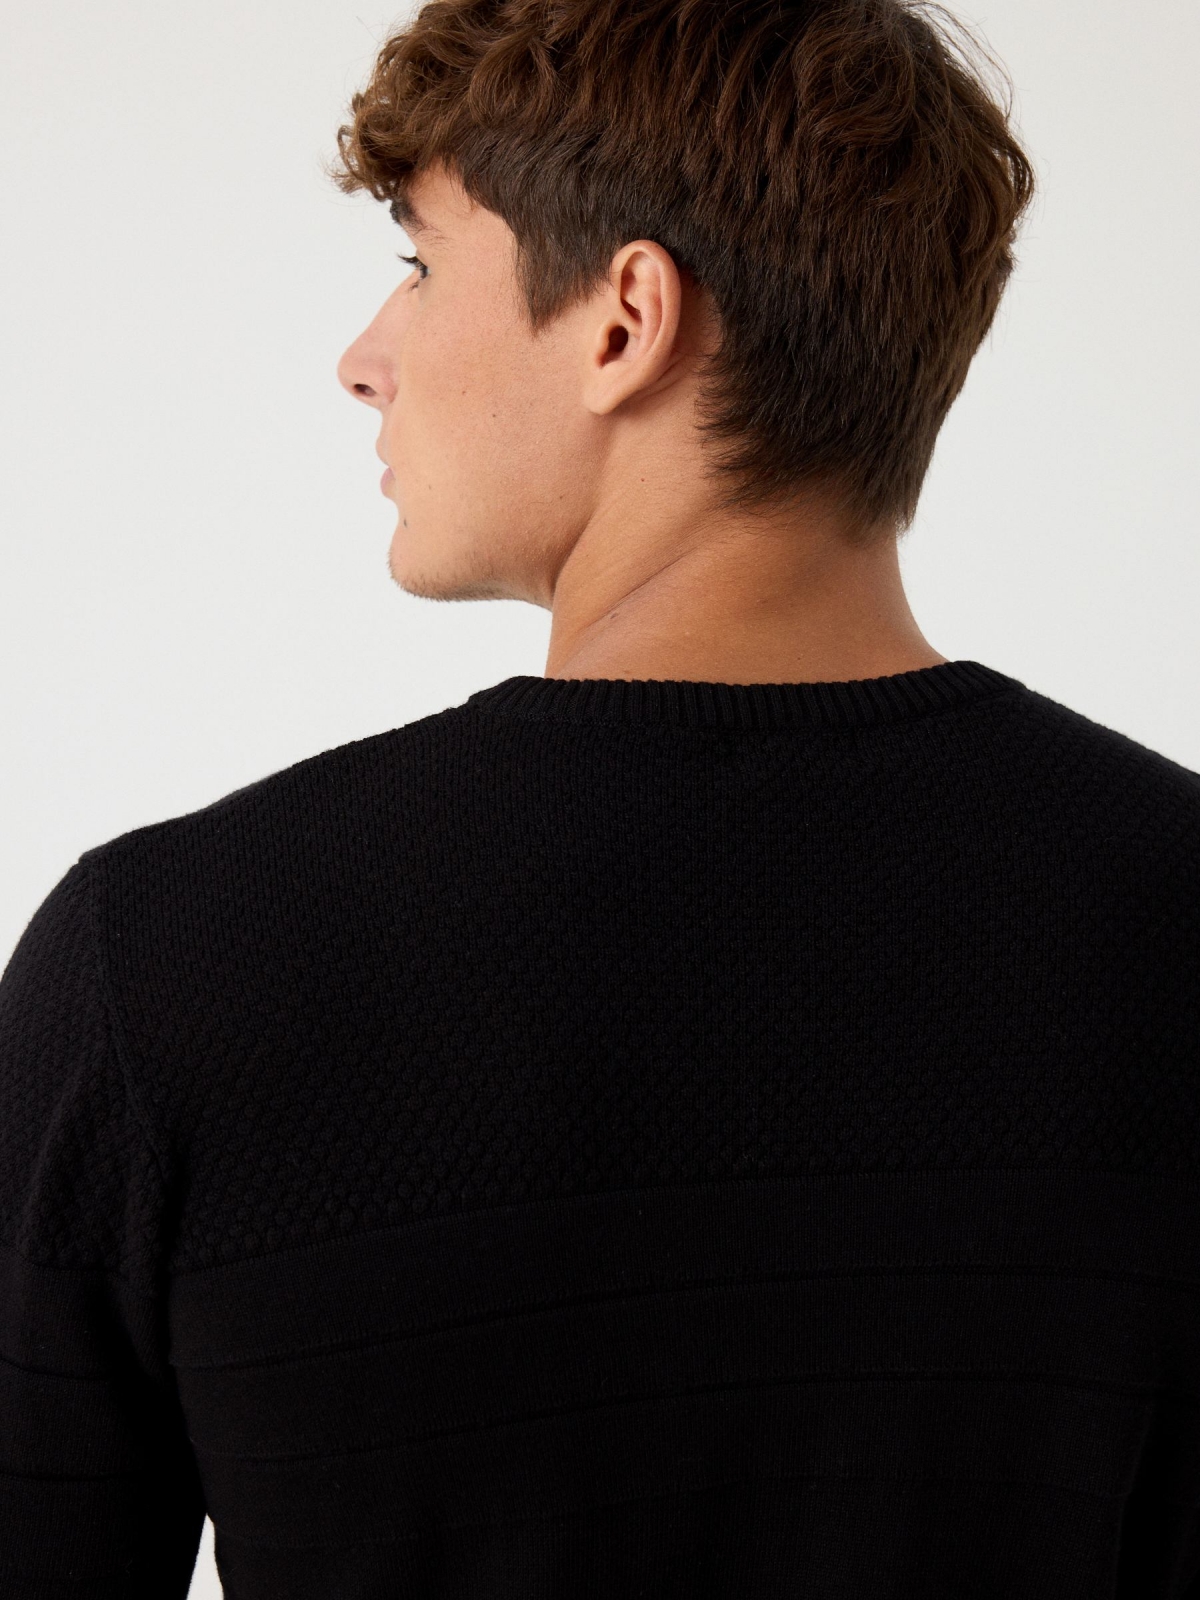 Basic striped texture sweater black detail view